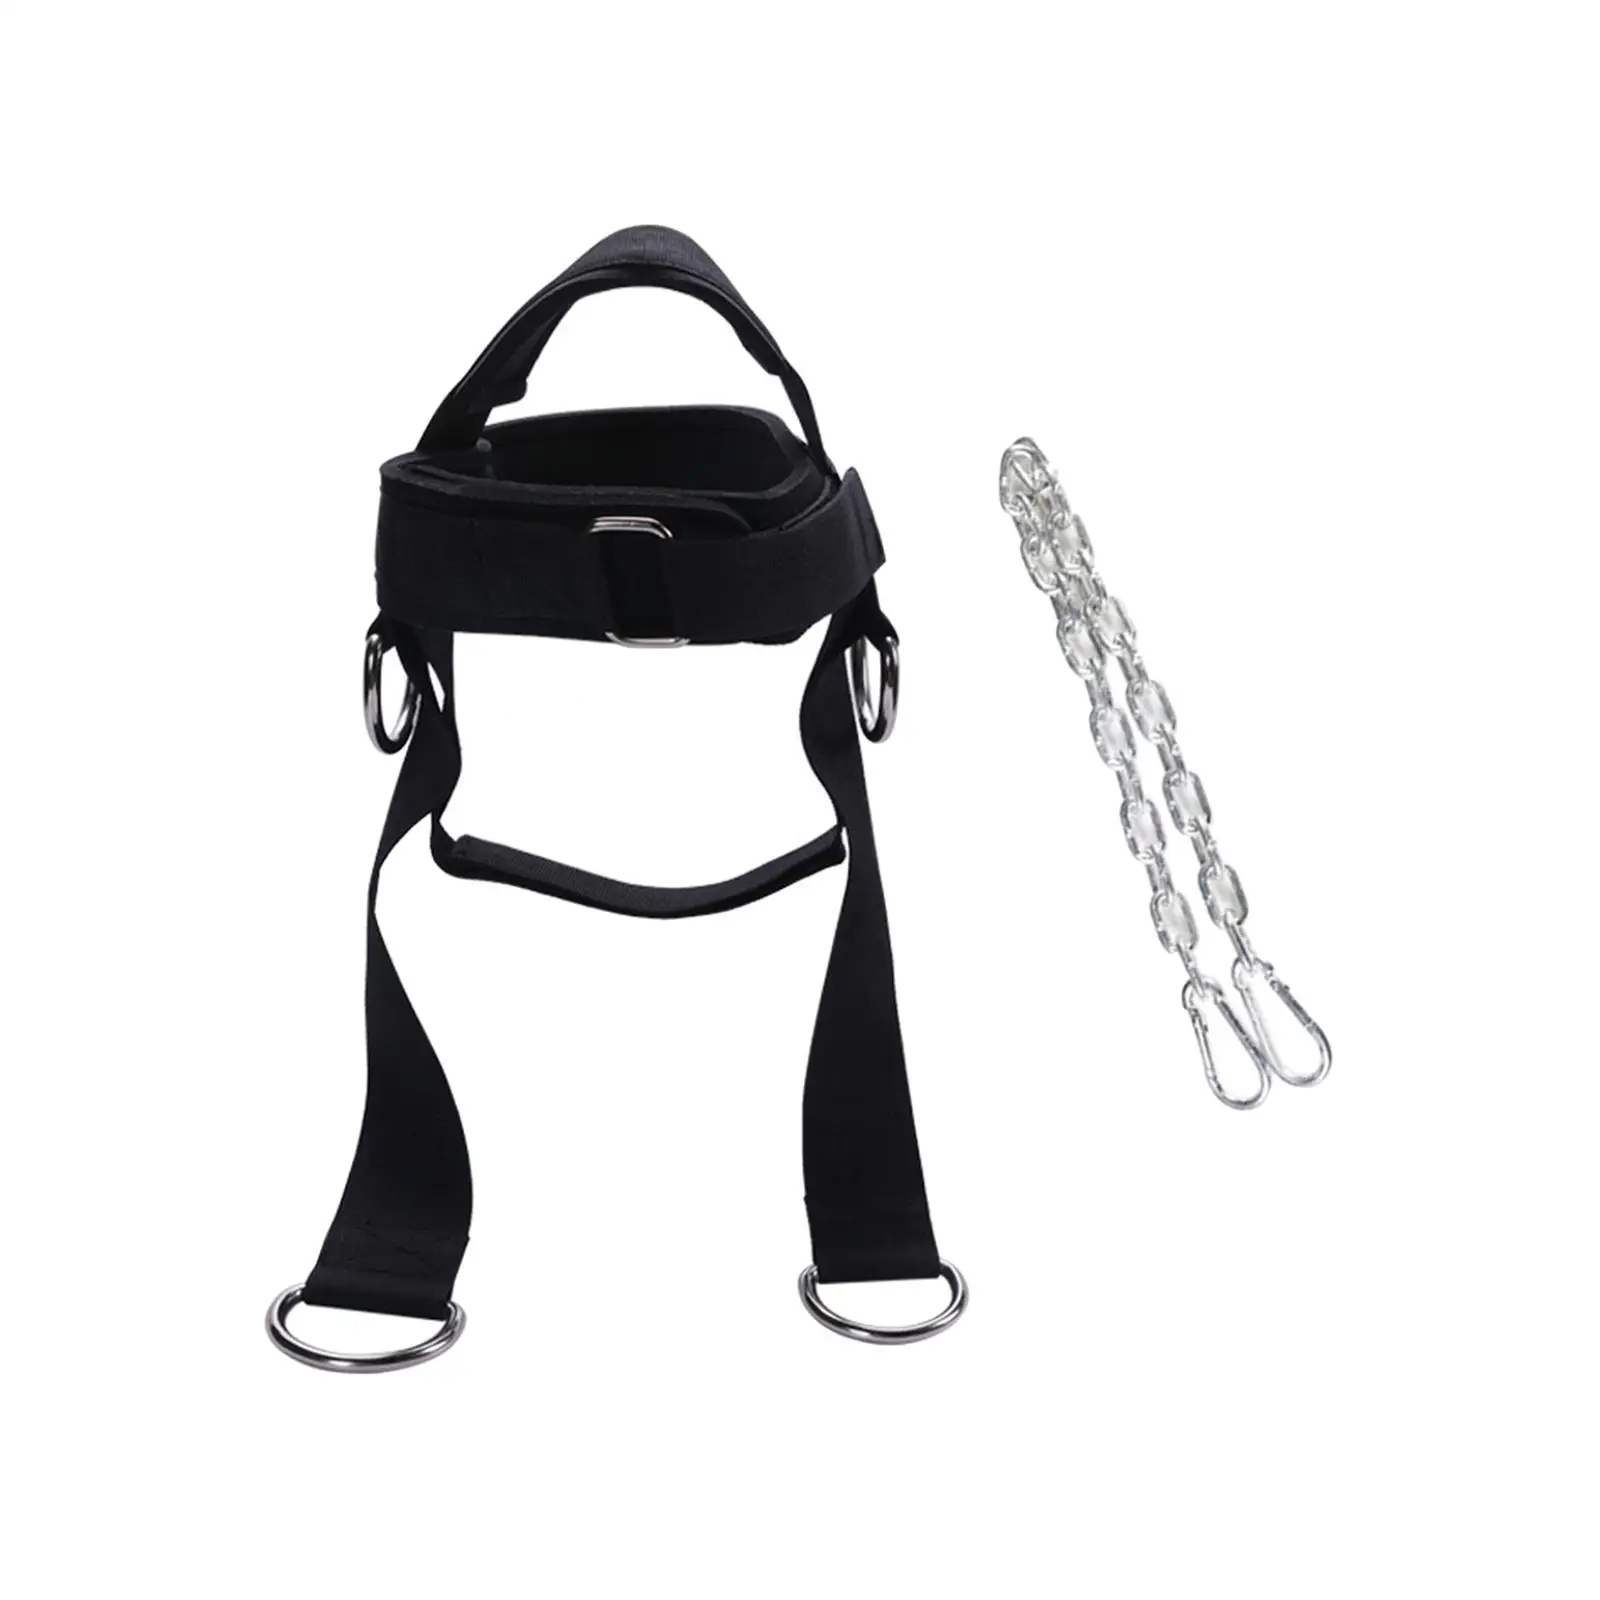 Head Neck Training Exerciser, Head Neck Harness with Metal Chain Strength